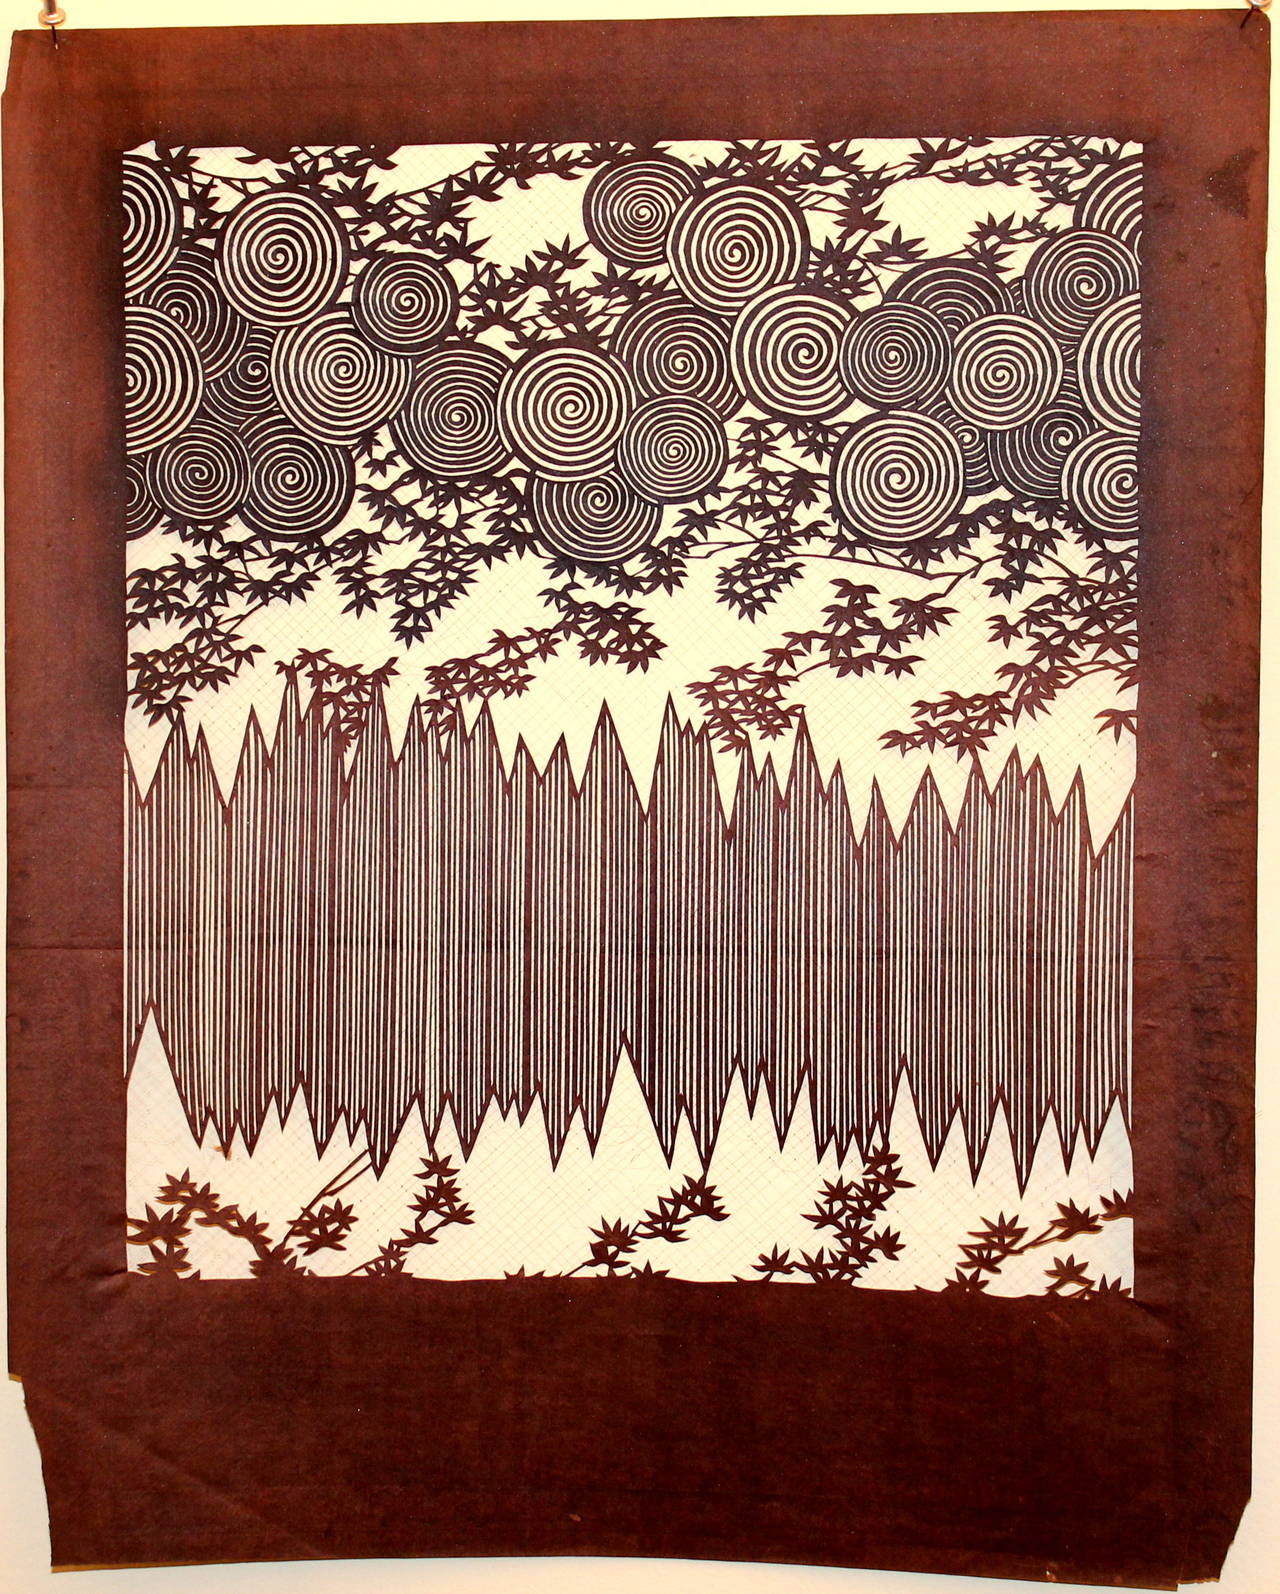 Antique Japanese katagami stencil for dyeing kimono fabric. Great design, beautifully rendered. Hand cut from mulberry paper. Reinforced with cross weave of fine silk thread (as seen in detail pics). Edo period, early 19th century. 21 1/2